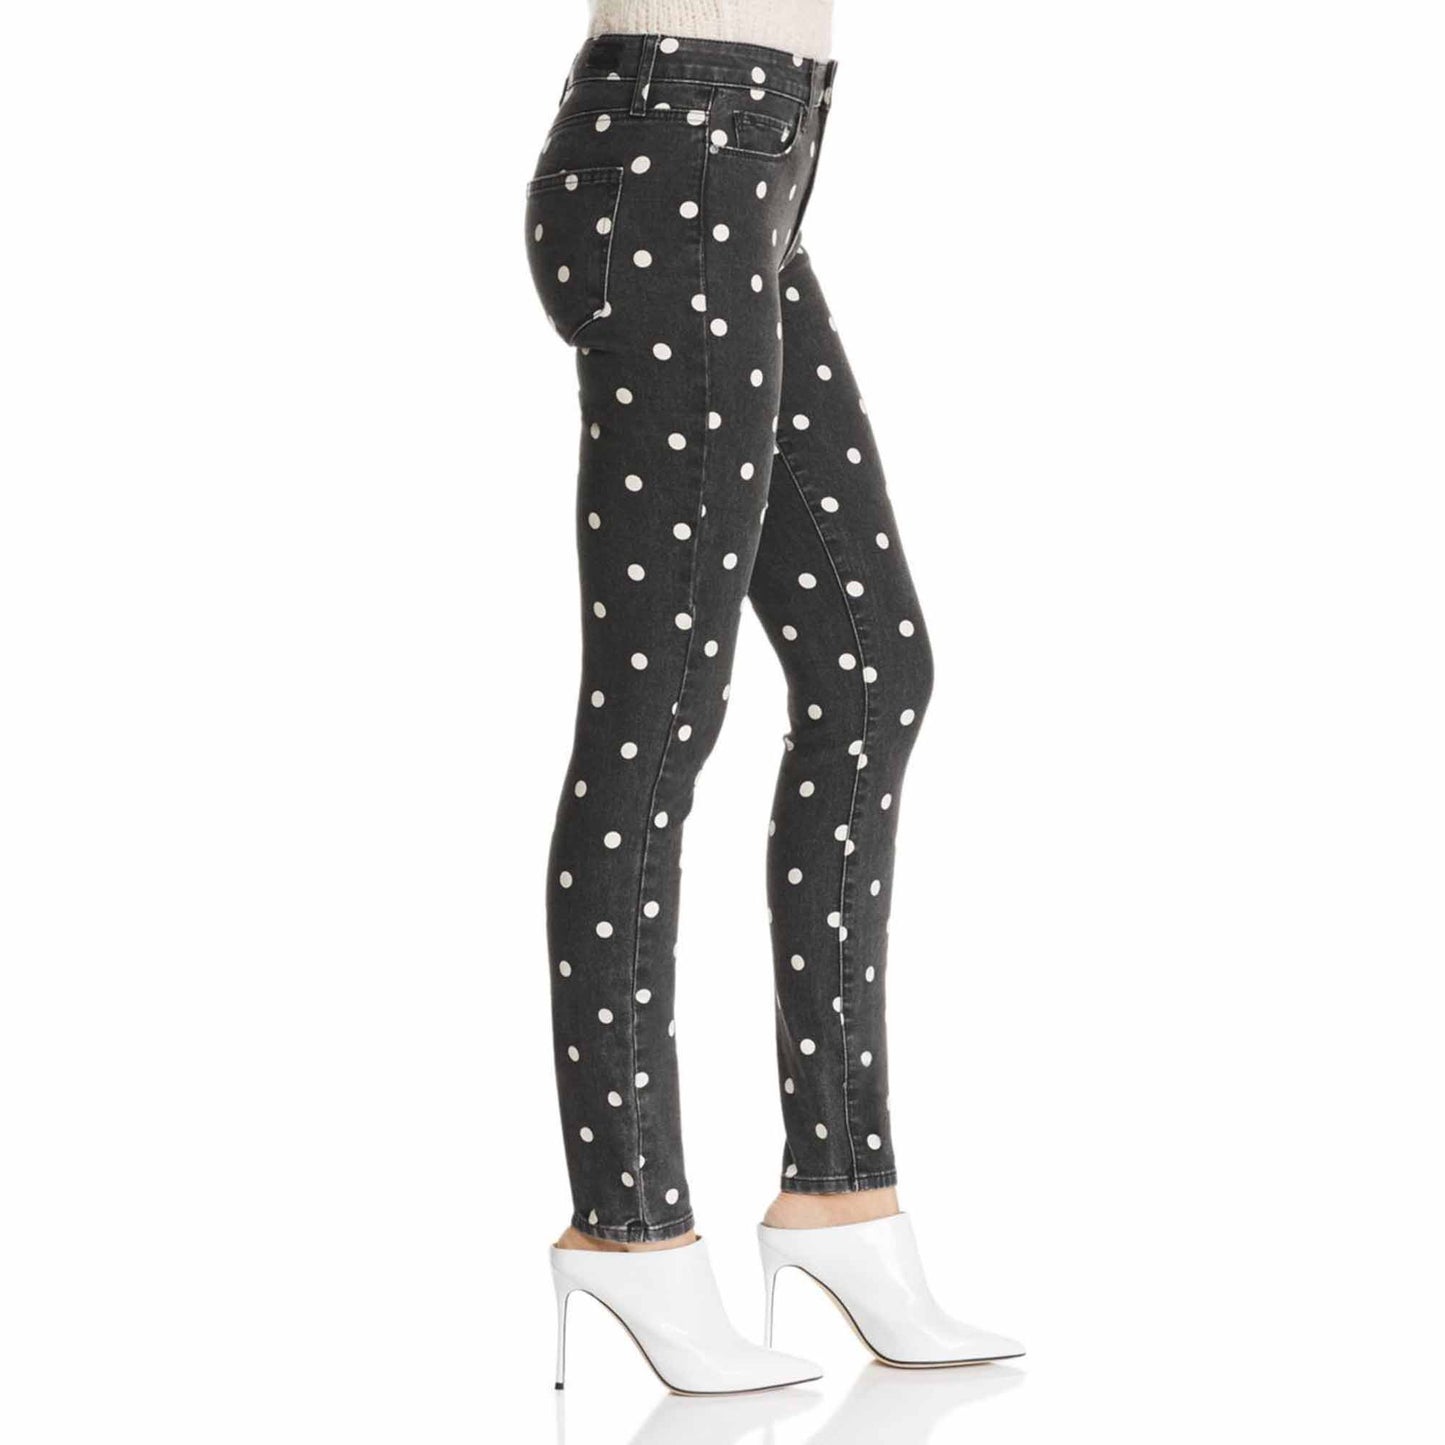 paige polka dot hoxton mid rise ultra skinny jeans - size 31